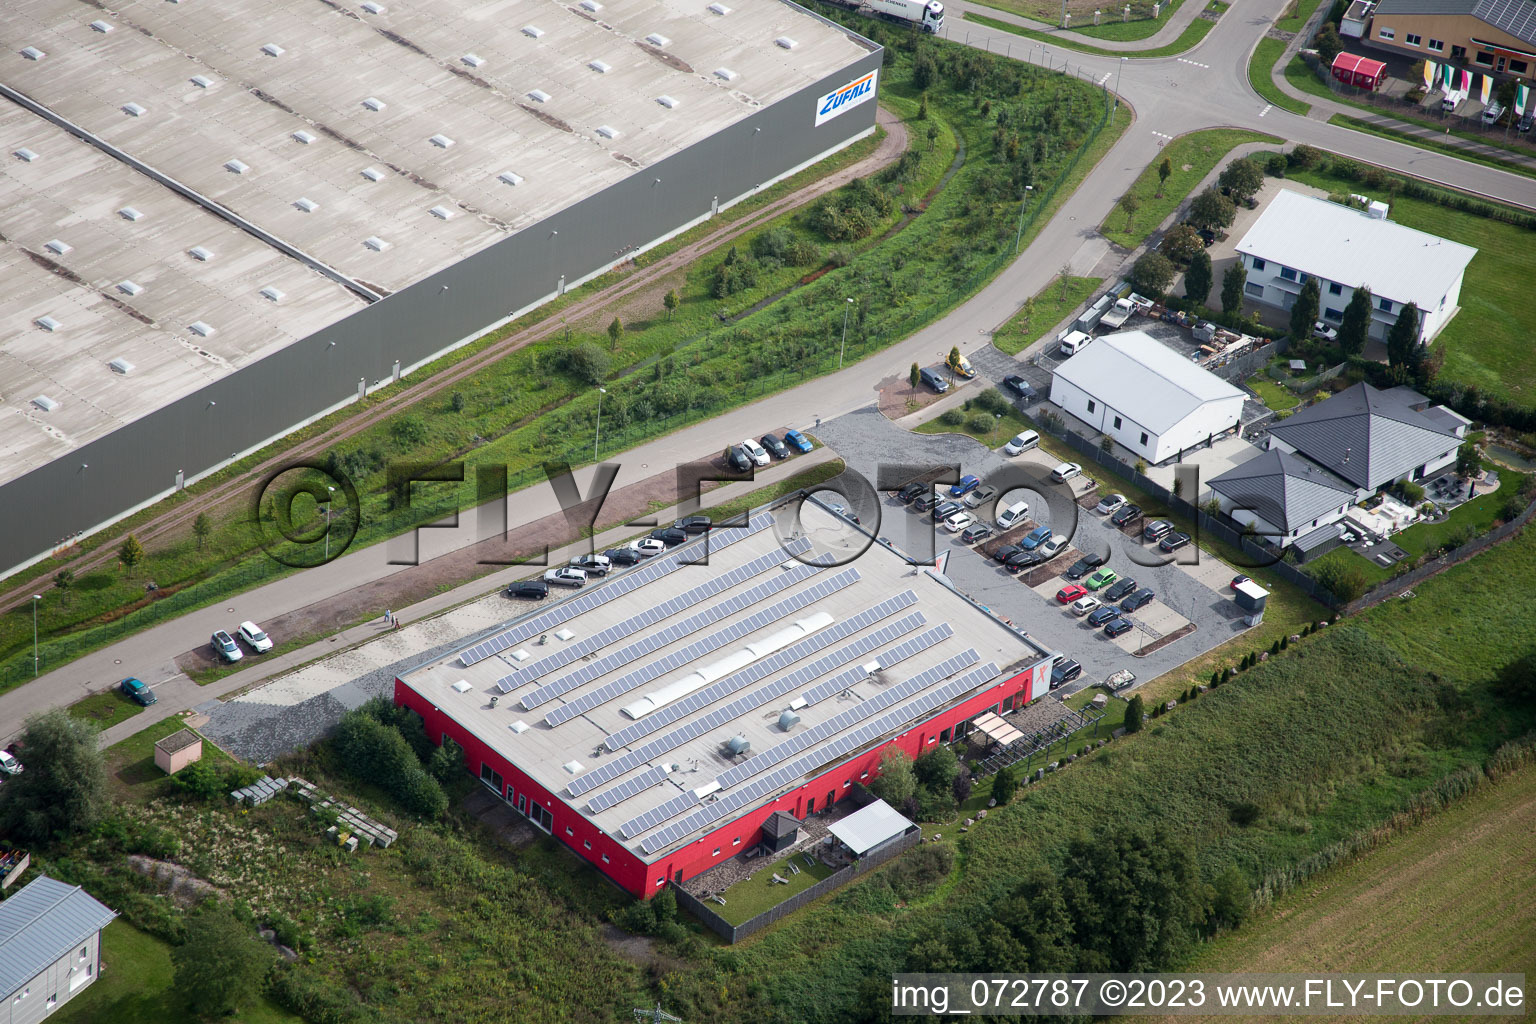 Oblique view of Horst industrial area in the district Minderslachen in Kandel in the state Rhineland-Palatinate, Germany